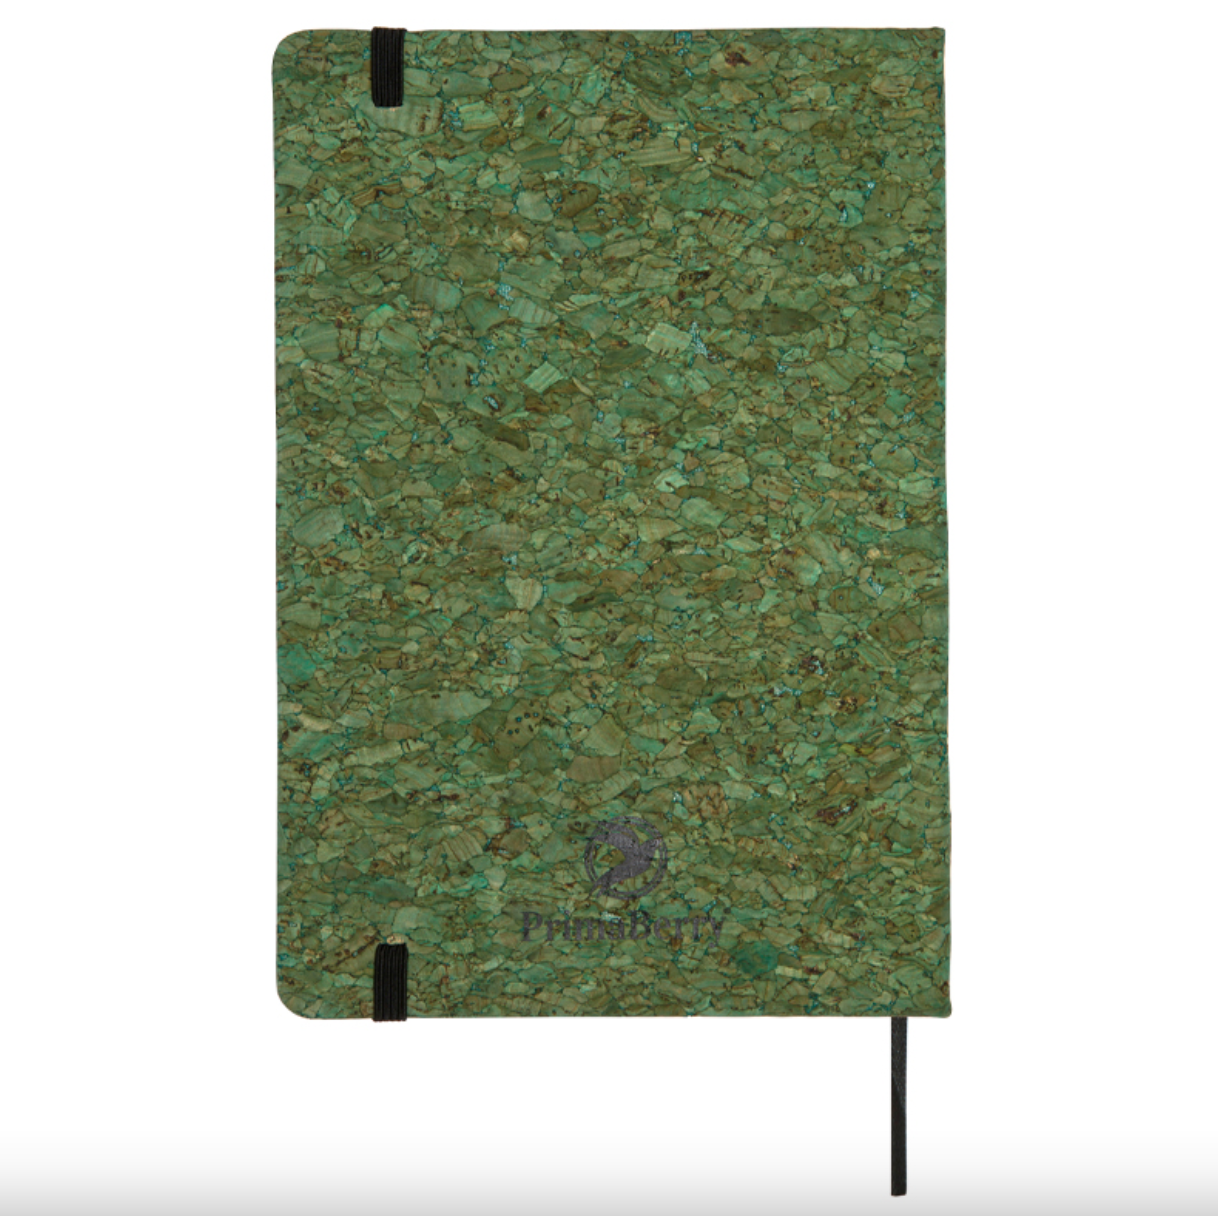 Orchid Cork Notebook: Eco-Friendly Notebook with Orchid Design for Nature Lovers, Students, Writers, and Vegans